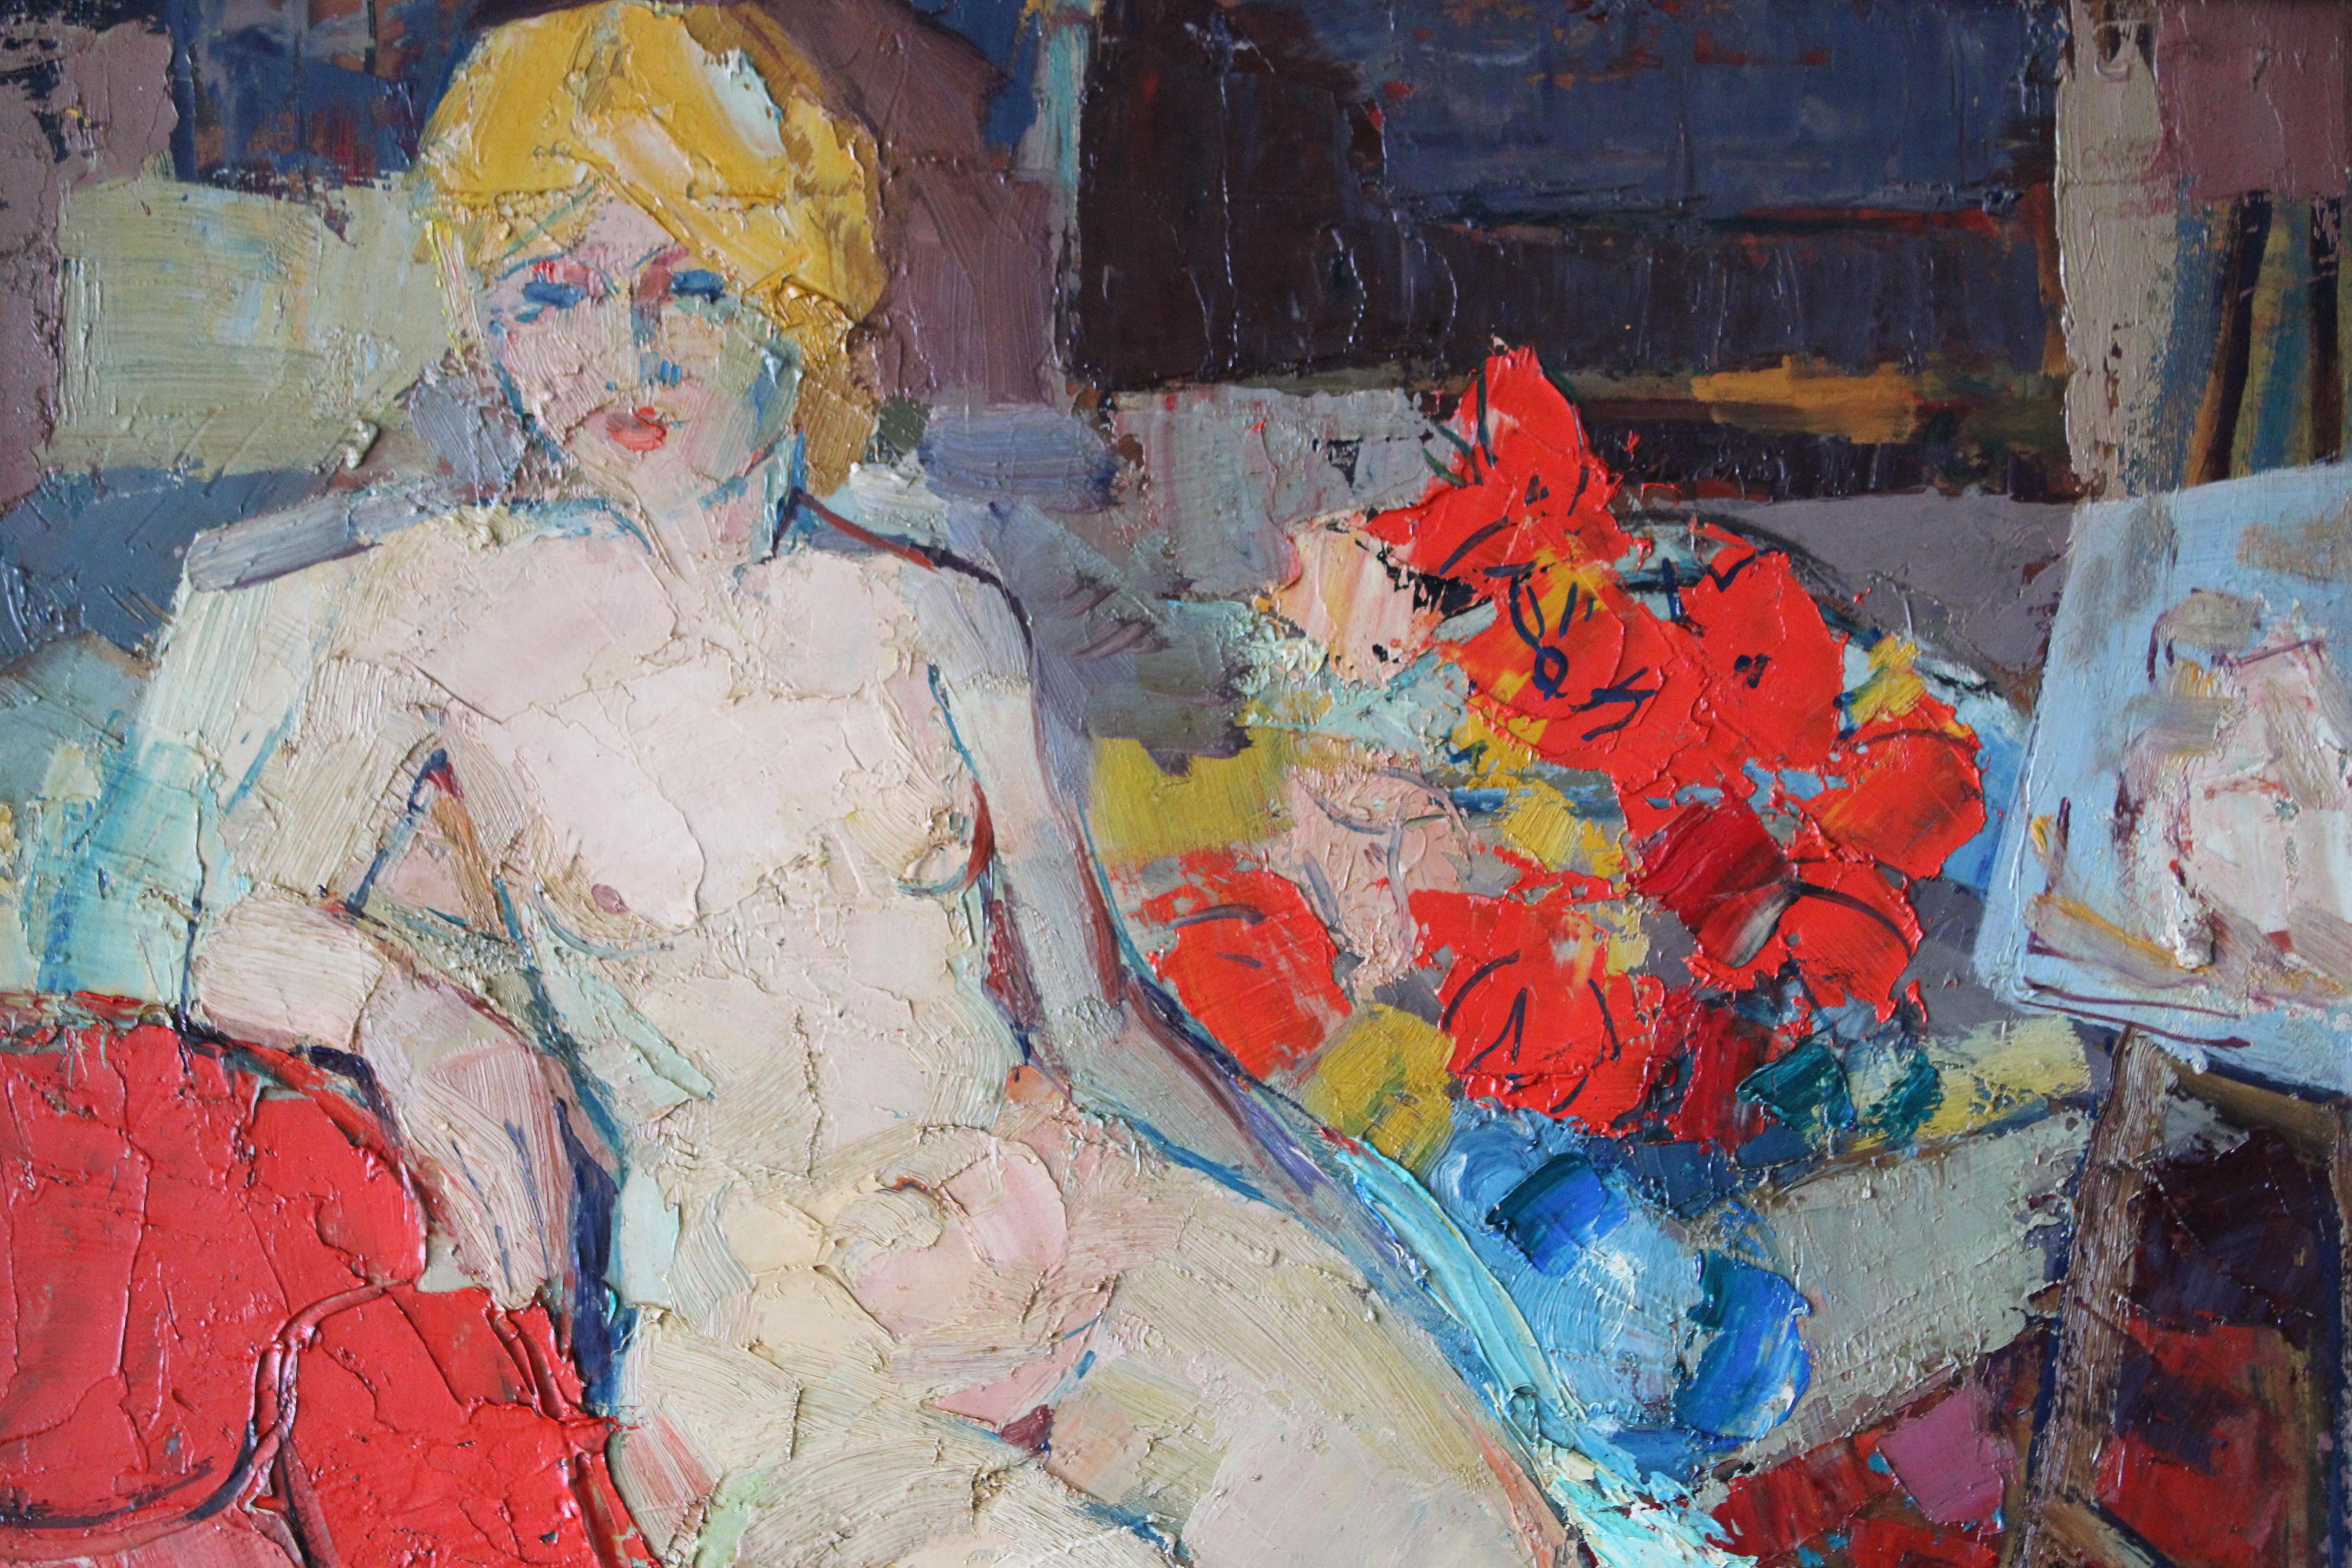 Vintage nude figurative painting/portrait painting by French artist, Francois Mengelatte (1920-2009).  This impressive and distinctive oil painting of a nude in the artist's studio is simply stunning.  It's an extravaganza of the most colourful hues